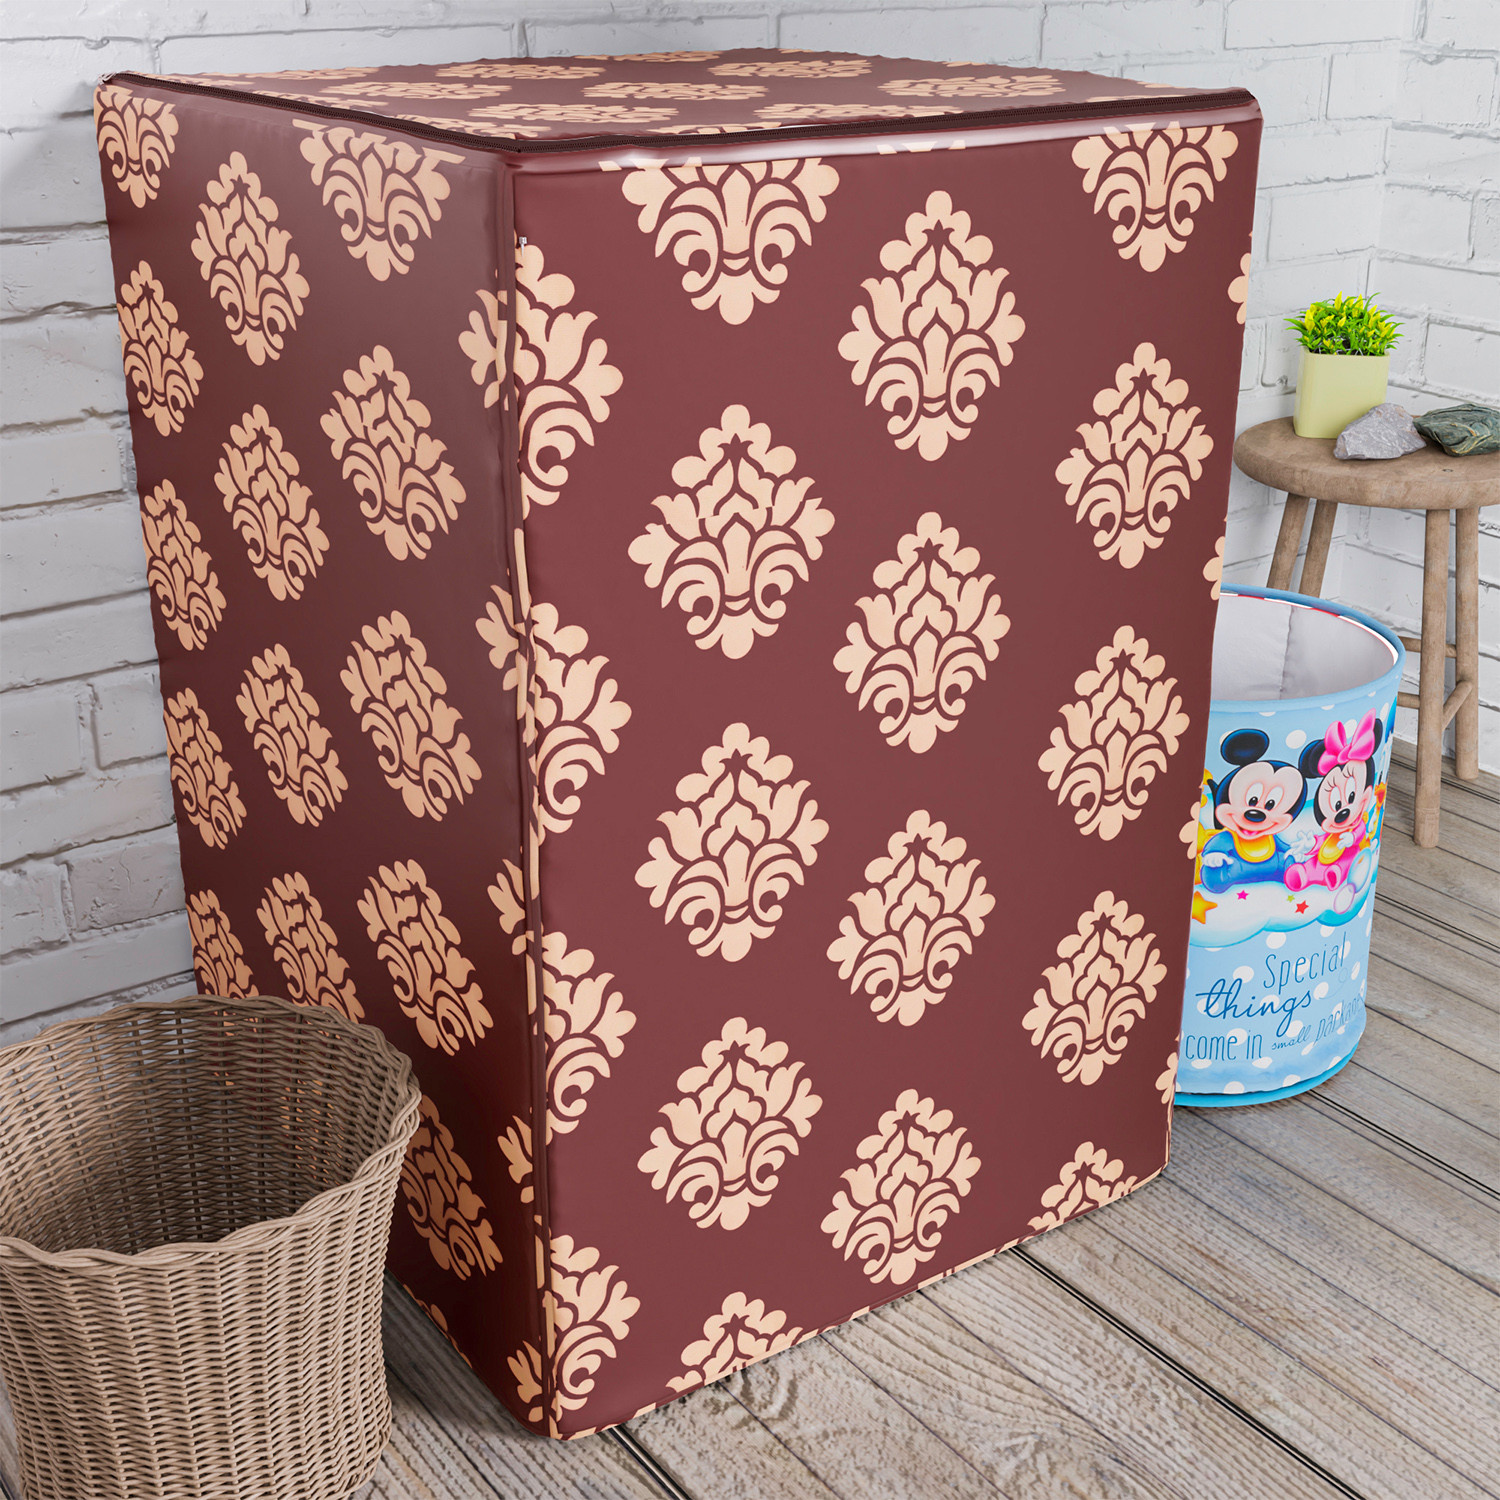 Kuber Industries Washing Machine Cover | Square Design Washing Machine Cover | Knitting Polyester | Top Load Fully-Automatic Washing Machine Cover | Maroon